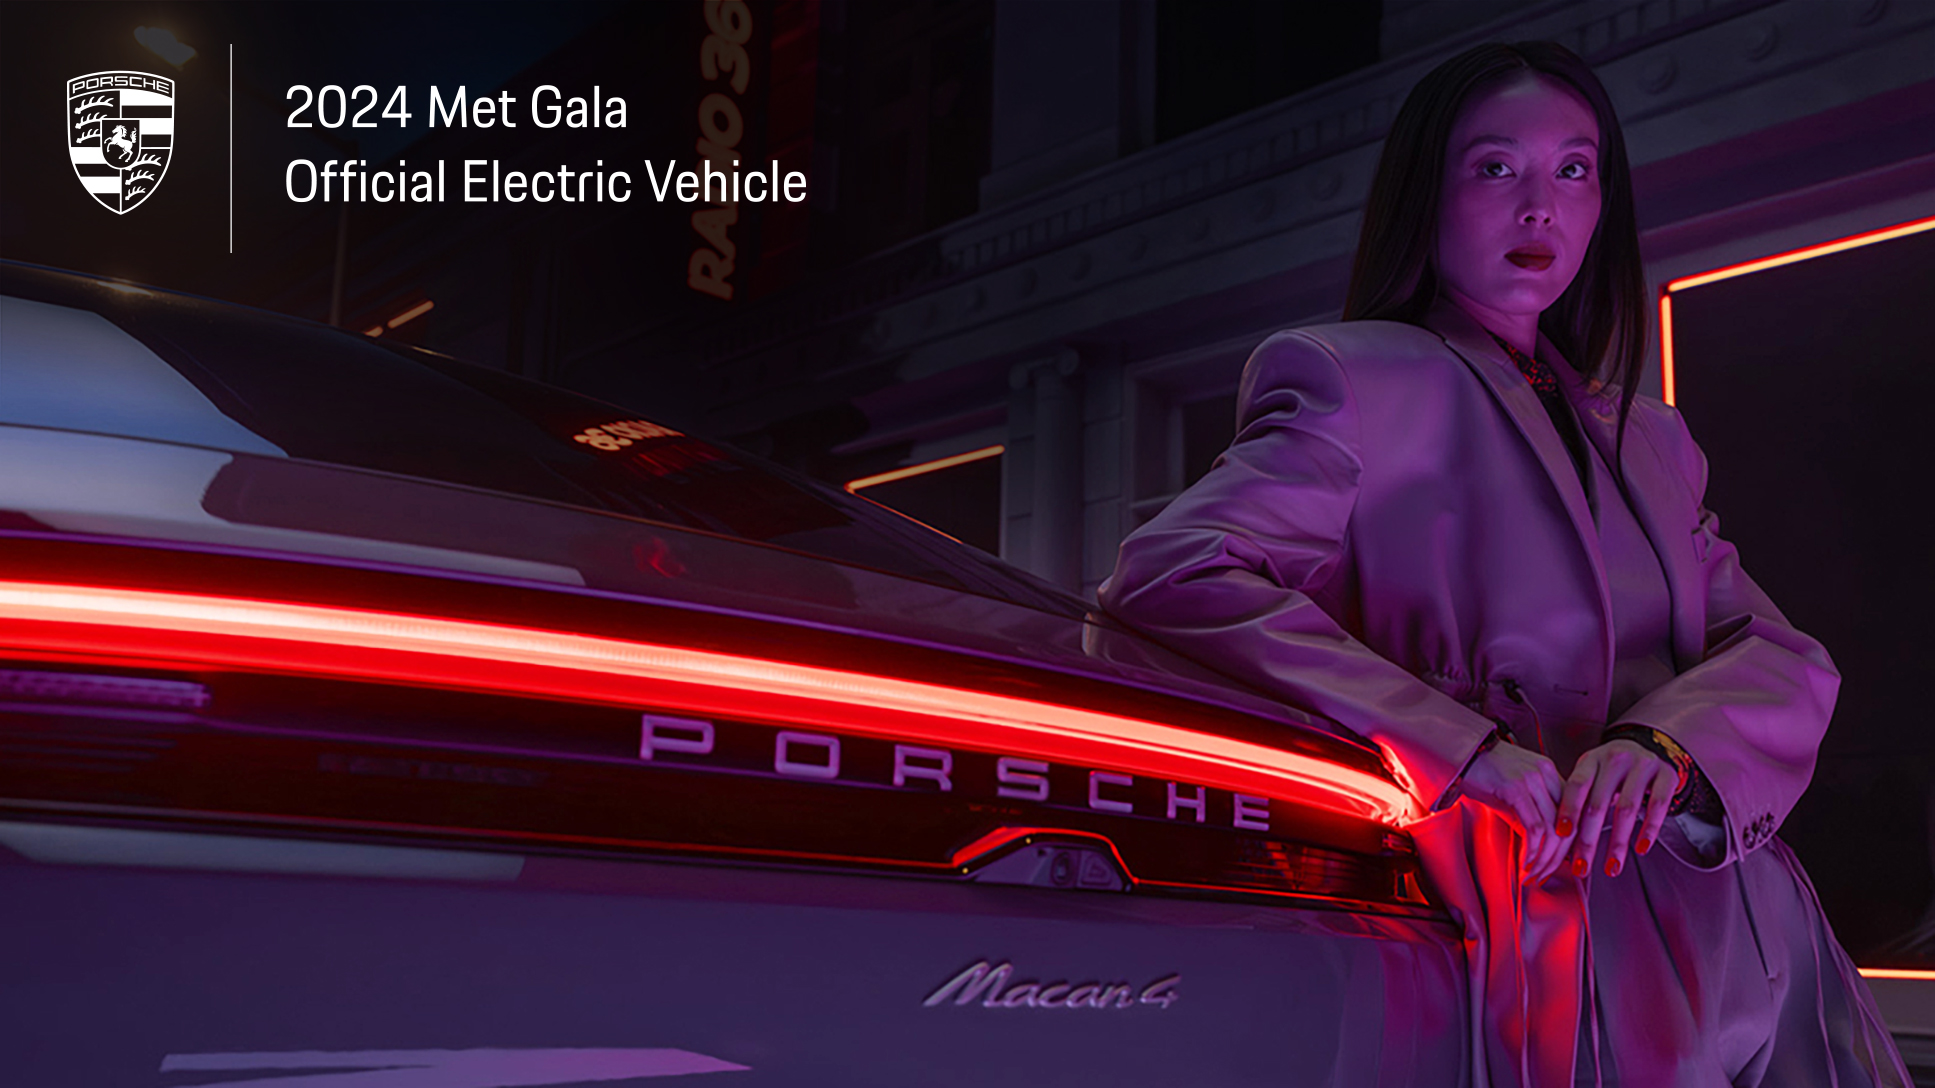 Porsche’s new Macan is the official electric vehicle of the 2024 Met Gala  